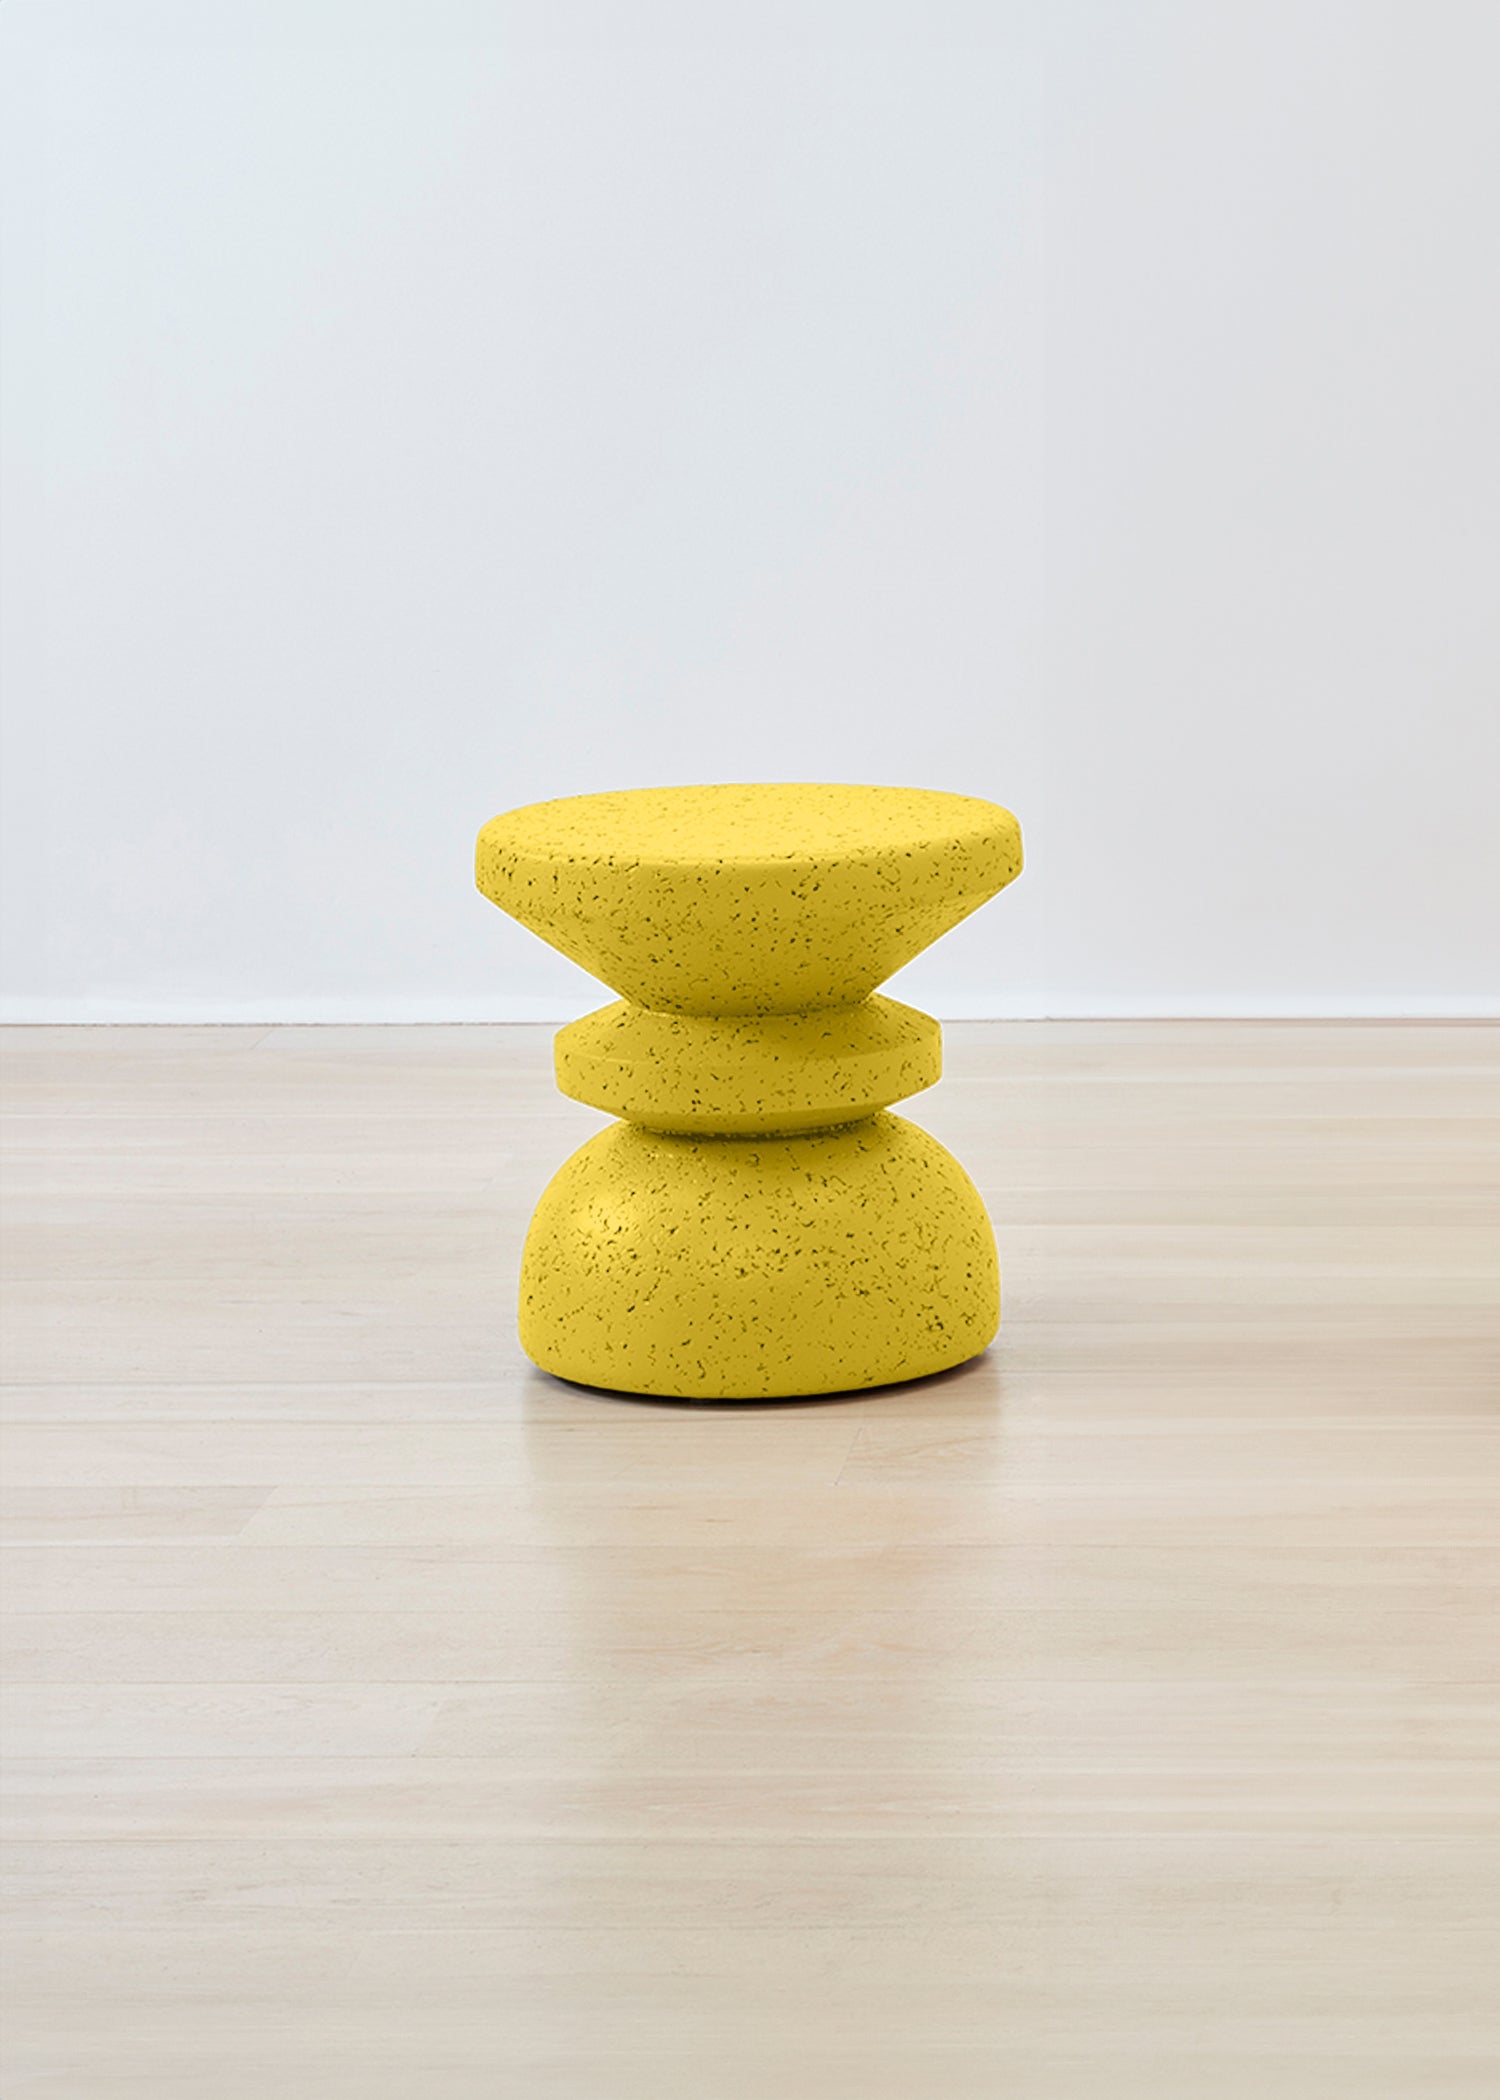 Bright and cheerful Kanju Wiid Design African Painted Stacked Cork Stool in a vibrant yellow hue, embodying the spirit of African artisanship with a modern twist. This eco-friendly, eye-catching piece combines functionality with bold aesthetic appeal, perfect for adding a pop of color and sustainable design to any interior.